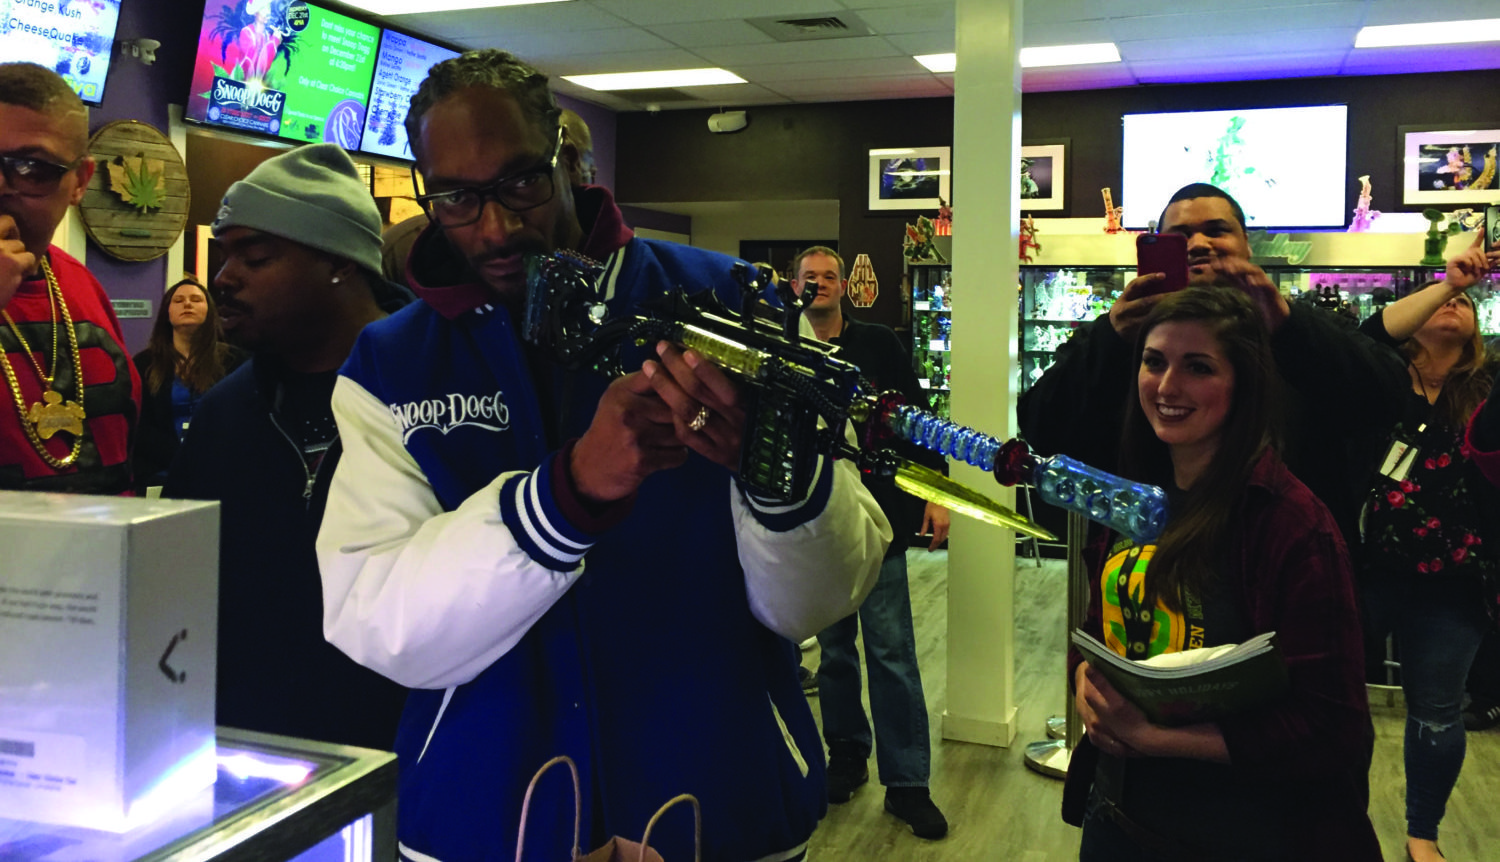 Snoop Dogg, one of the many entertainers with ties to the marijuana industry, checks out a glass gun-pipe during a visit to Clear Choice Cannabis in Tacoma, Washington. 